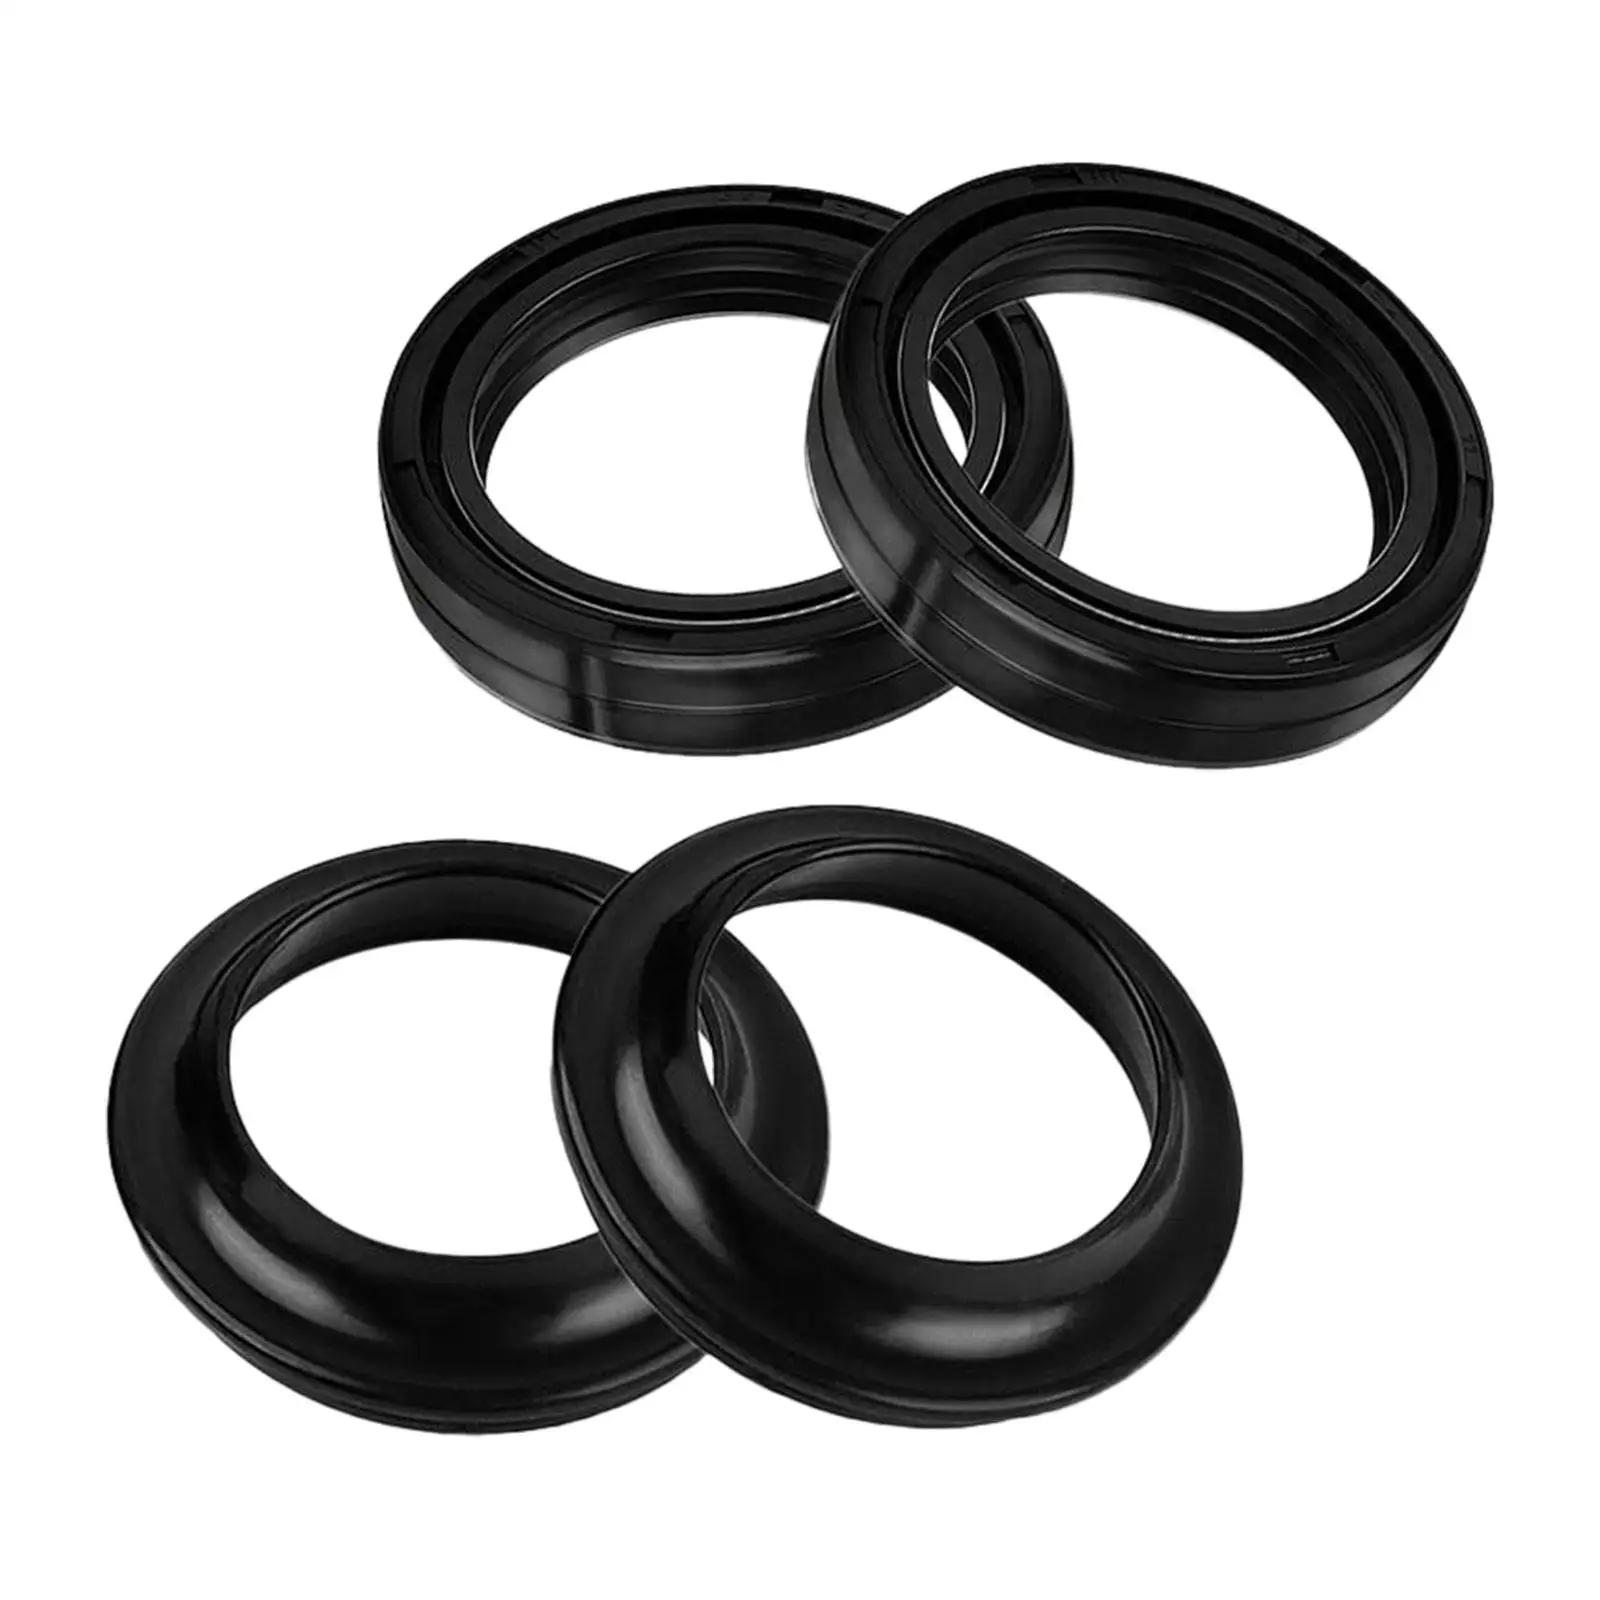 4x Front Fork Oil Seal and Dust Seal Heat Resistance Durable 39x52x11mm for Harley XL883N XL1200L XL1200R Xlh883L Xlh1100